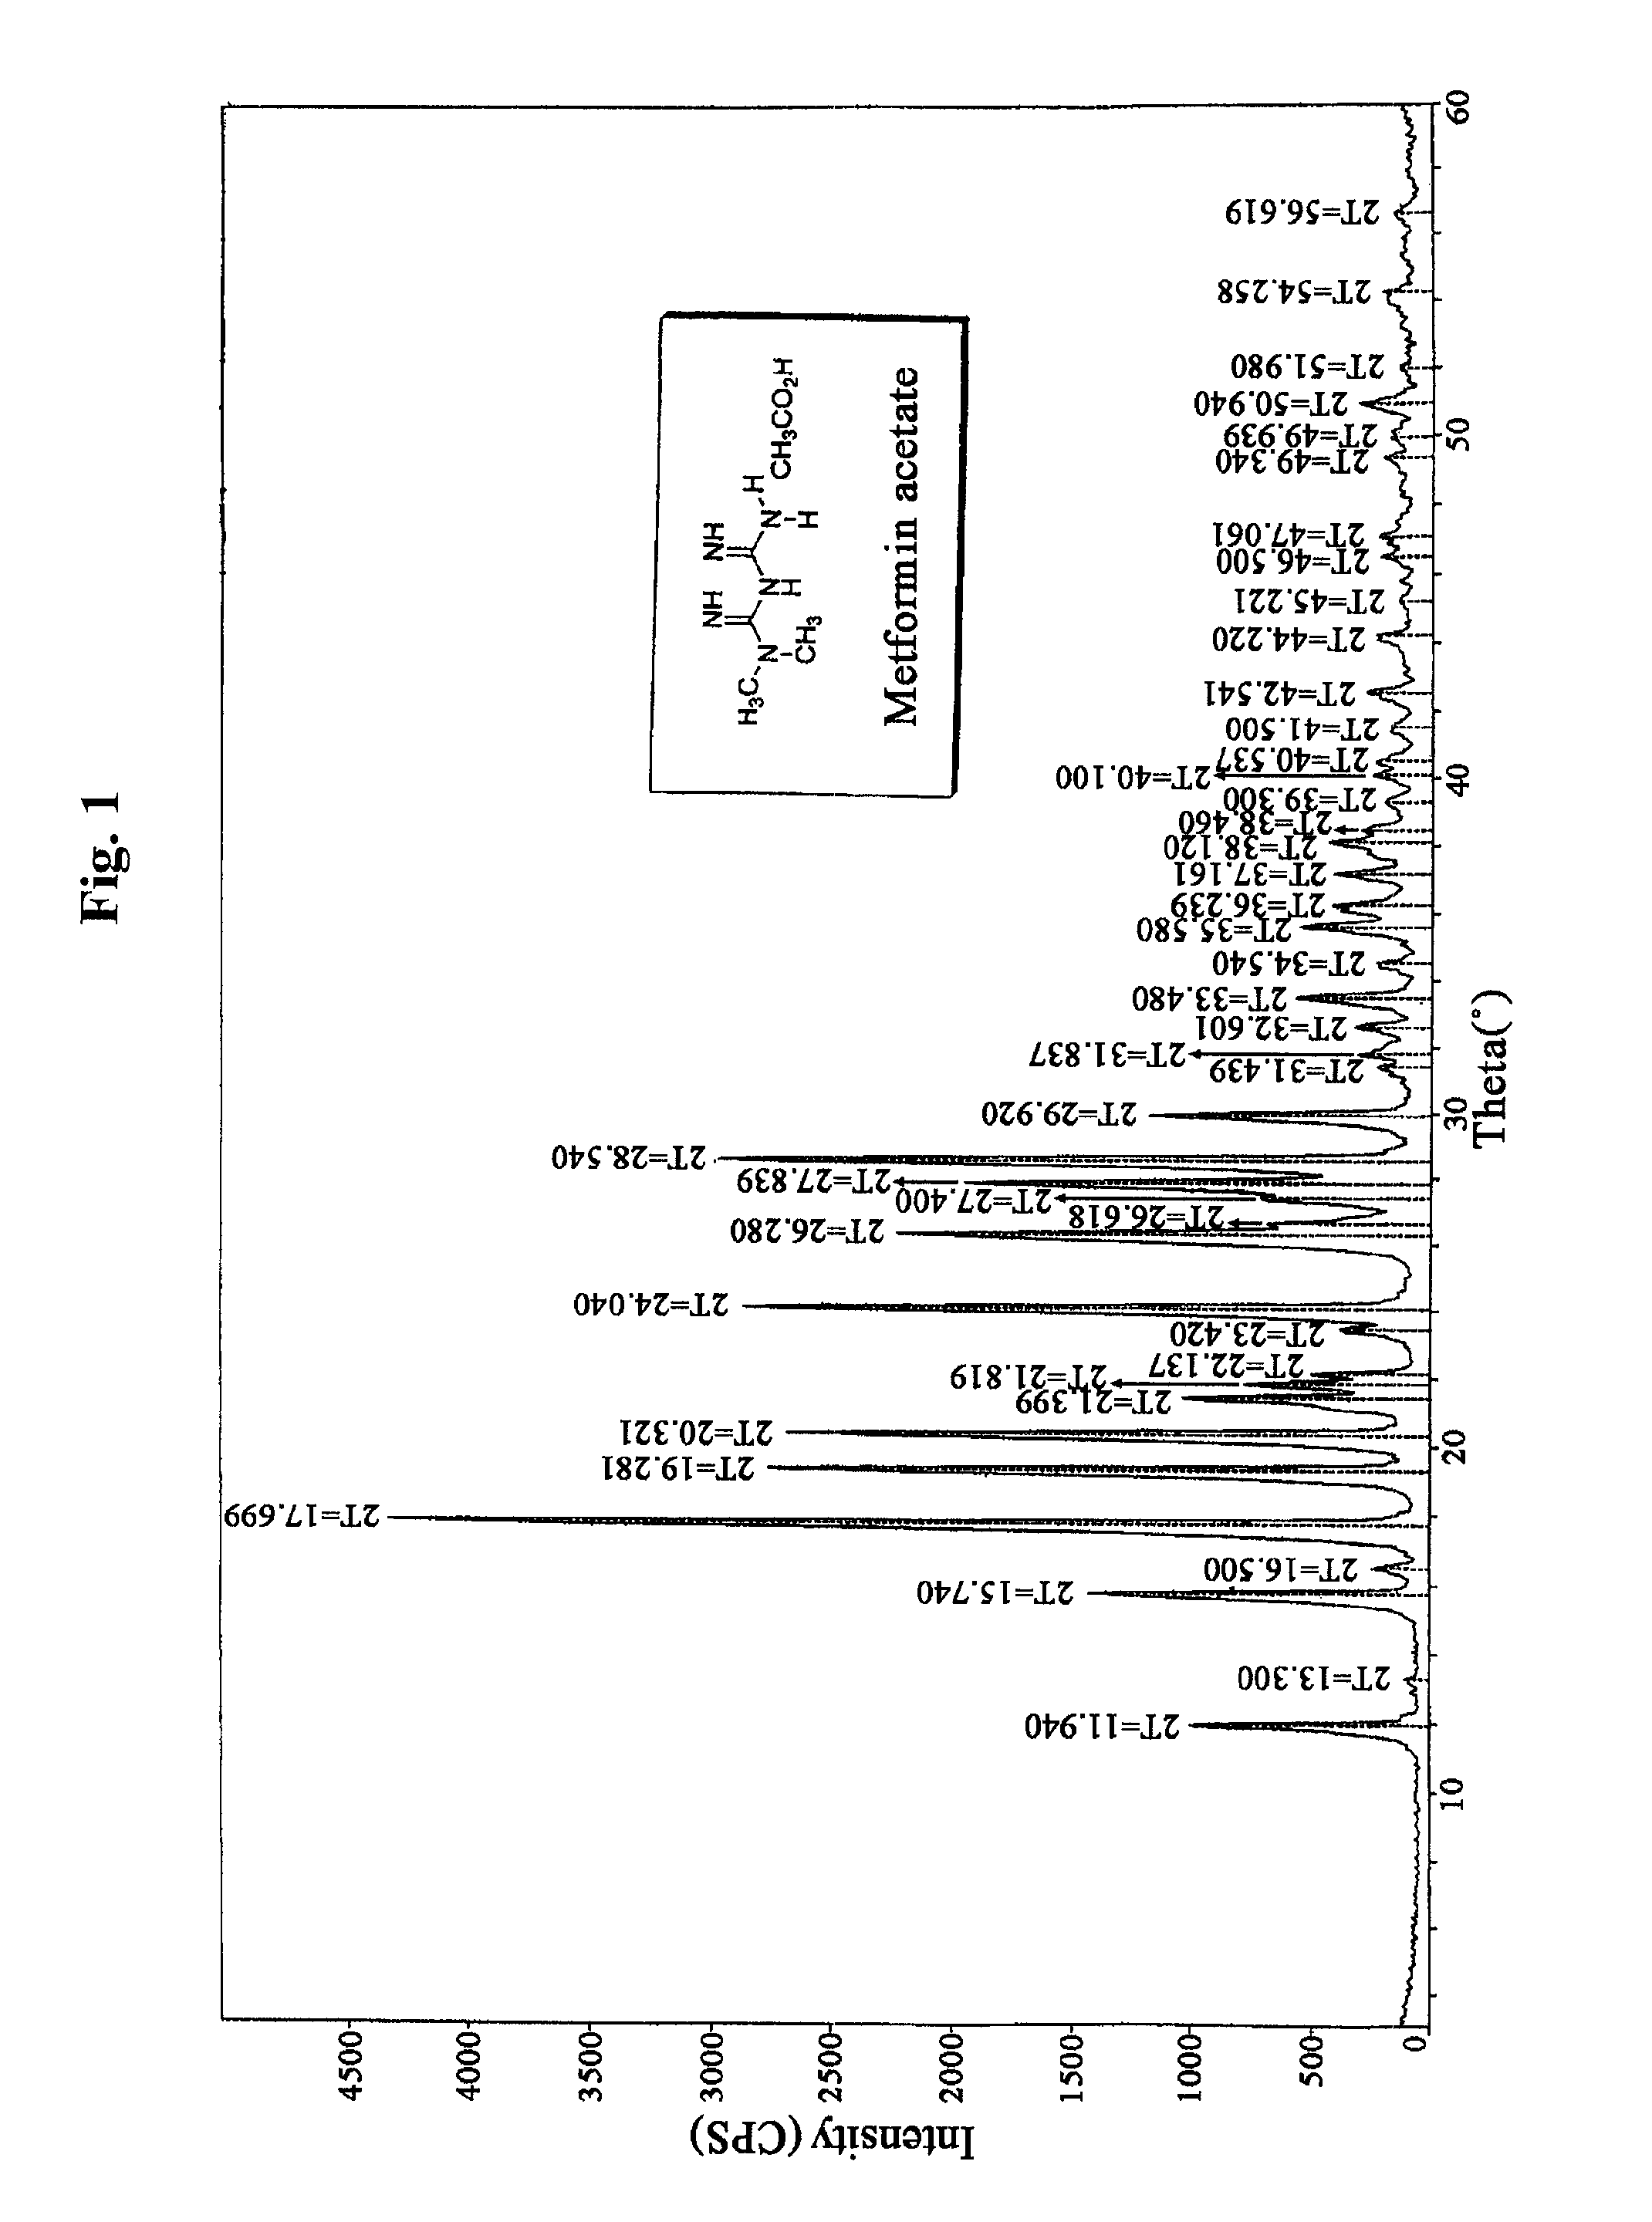 N, N-dimethyl imidodicarbonimidic diamide acetate, method for producing the same and pharmaceutical compositions comprising the same